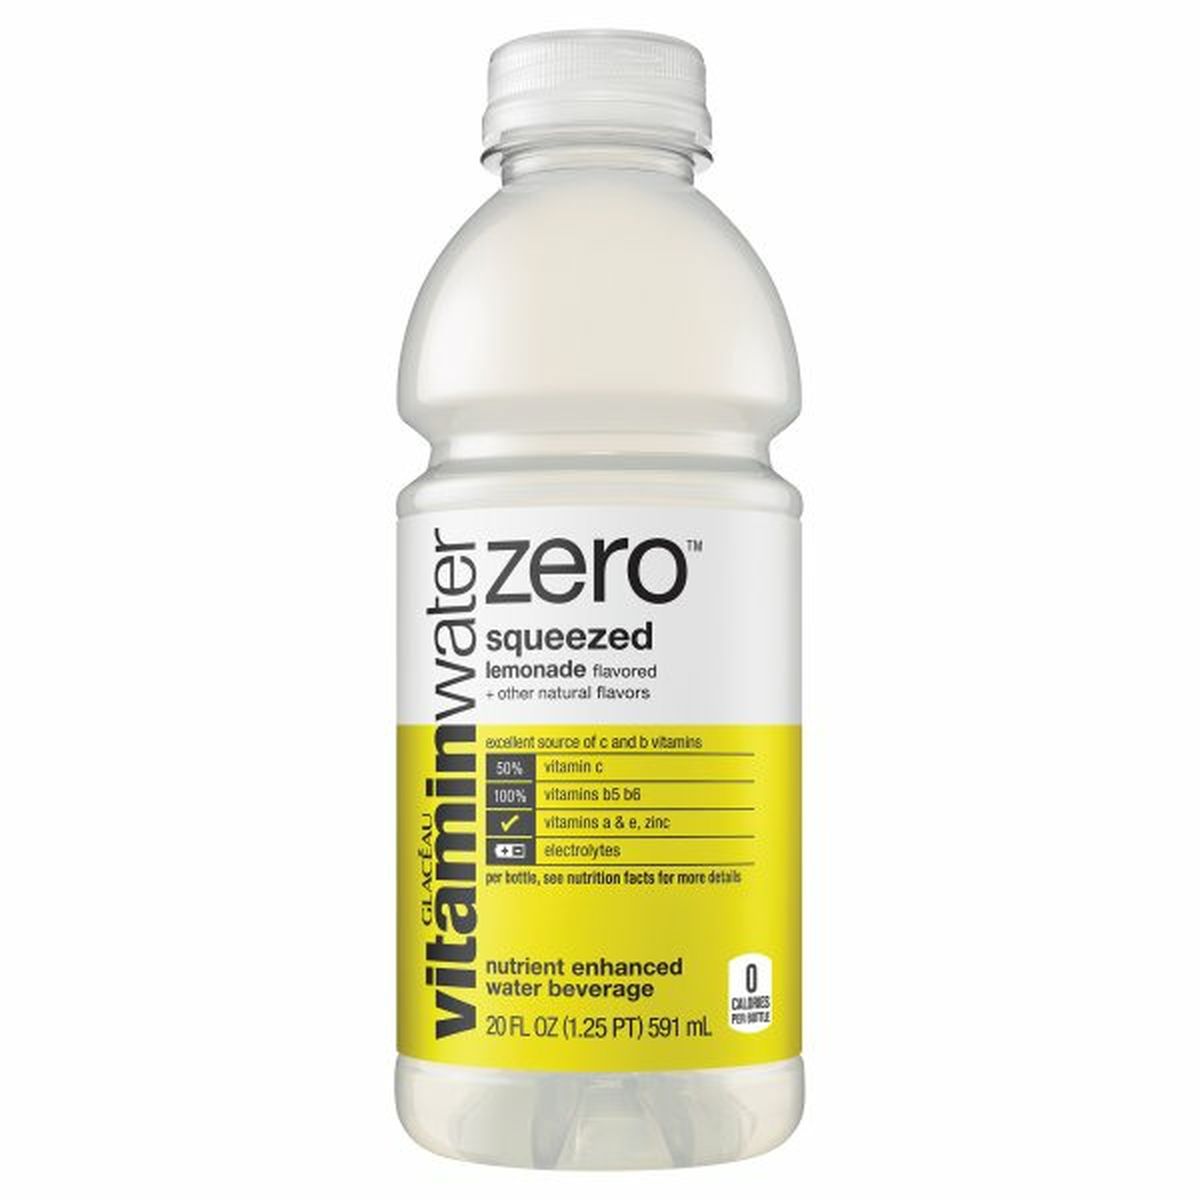 Calories in Glaceau Vitaminwater Squeezed Zero Calorie Flavored Water